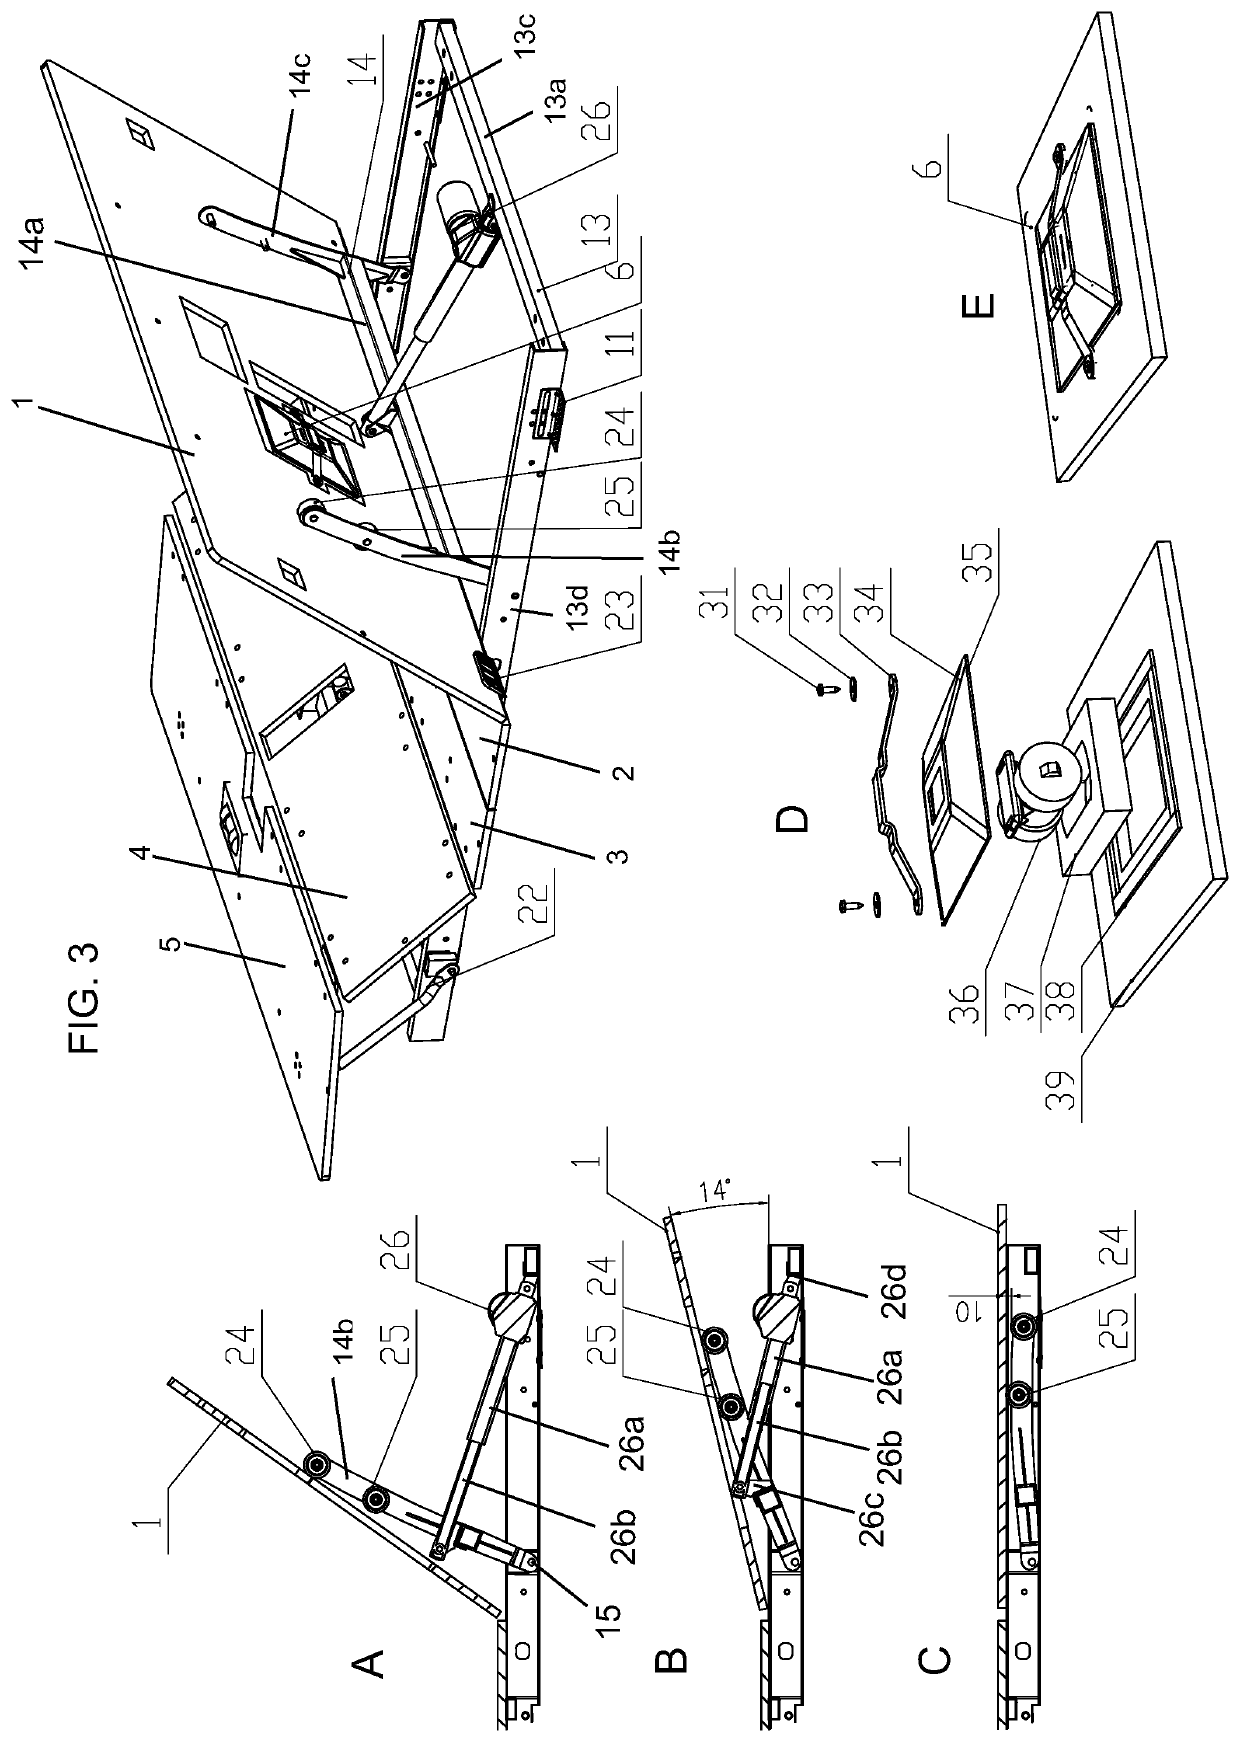 Adjustable bed with folding mechanism